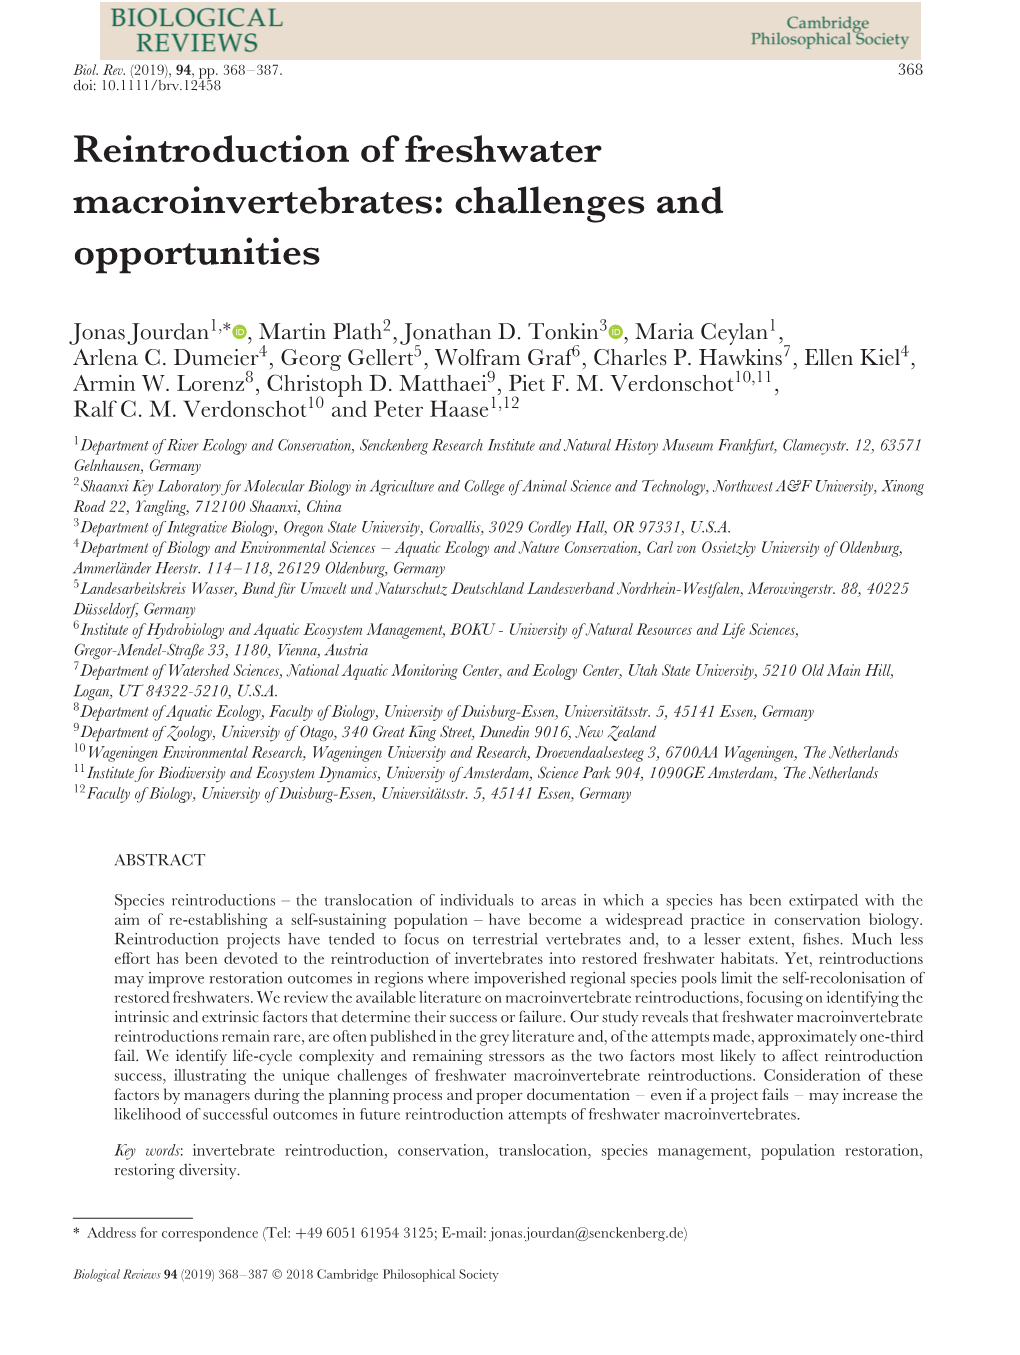 Reintroduction of Freshwater Macroinvertebrates: Challenges and Opportunities